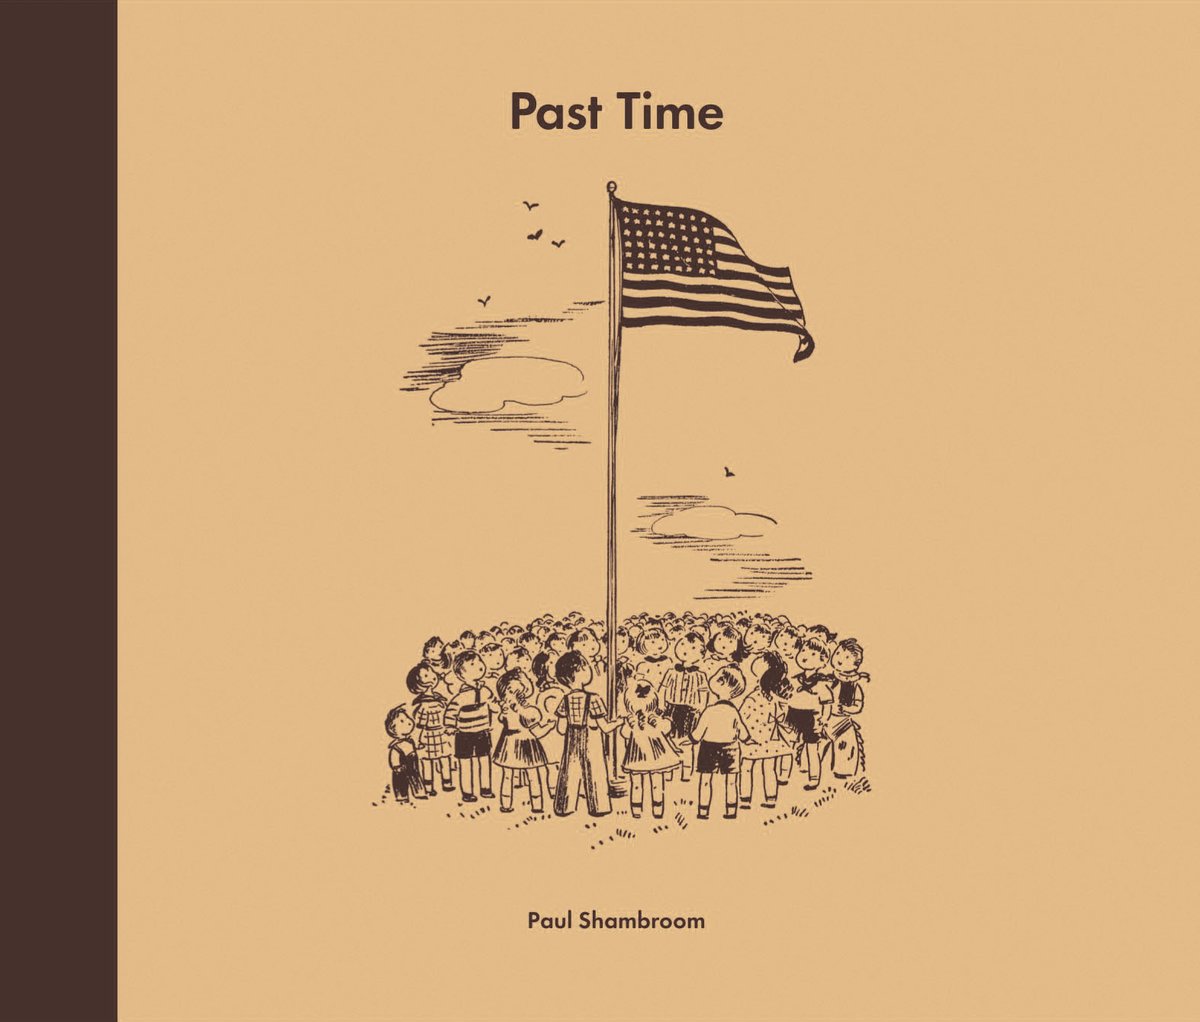 2/ ⁣⁣⁣⁣Paul Shambroom’s new book, Past Time, is a critical look at the “good old days.” You know, the America that was great way back when?